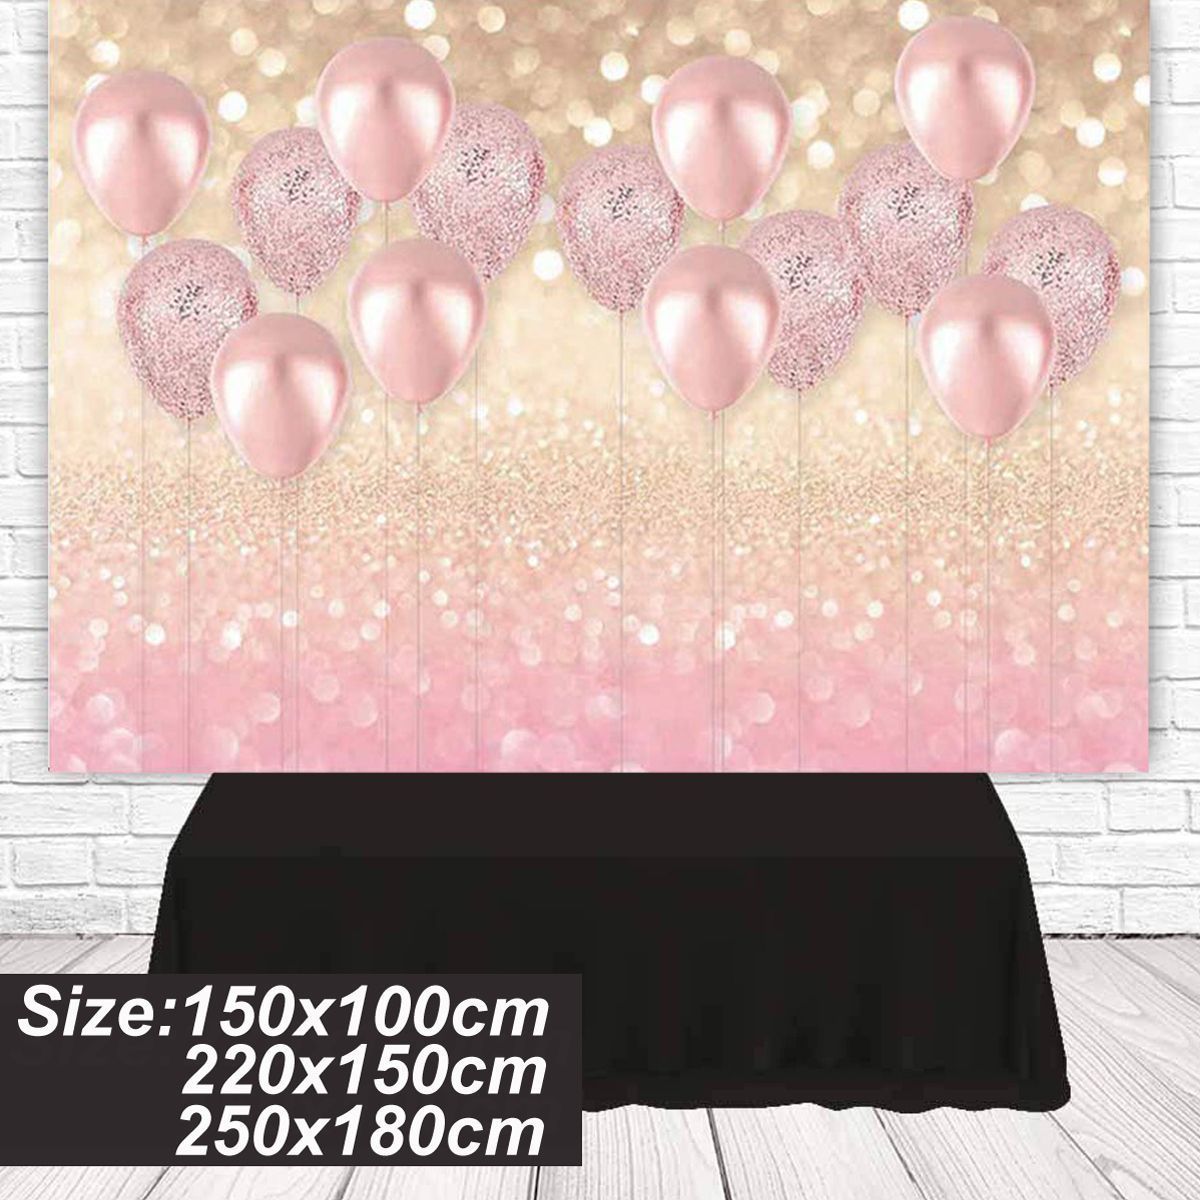 1x15m-15x22m-18x25m-Vinyl-Pink-Balloon-Photo-Backdrops-Photography-Background-Cloth-Party-Decoration-1680039